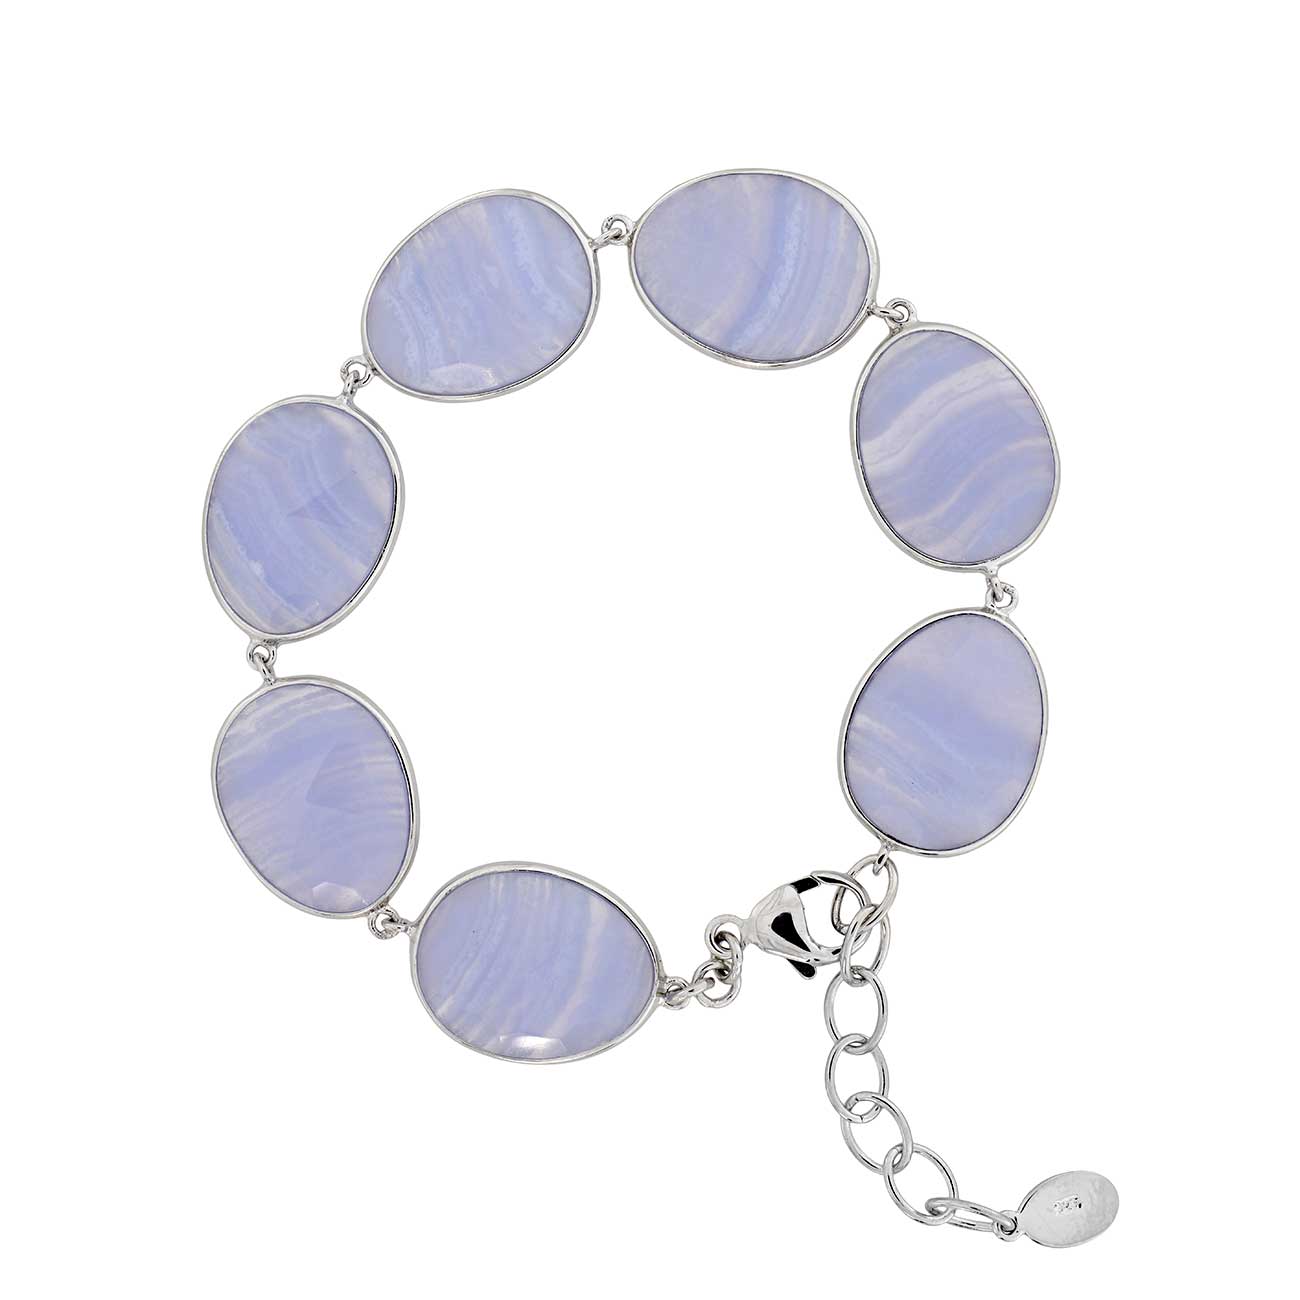 Blue Agate and Silver Bracelet